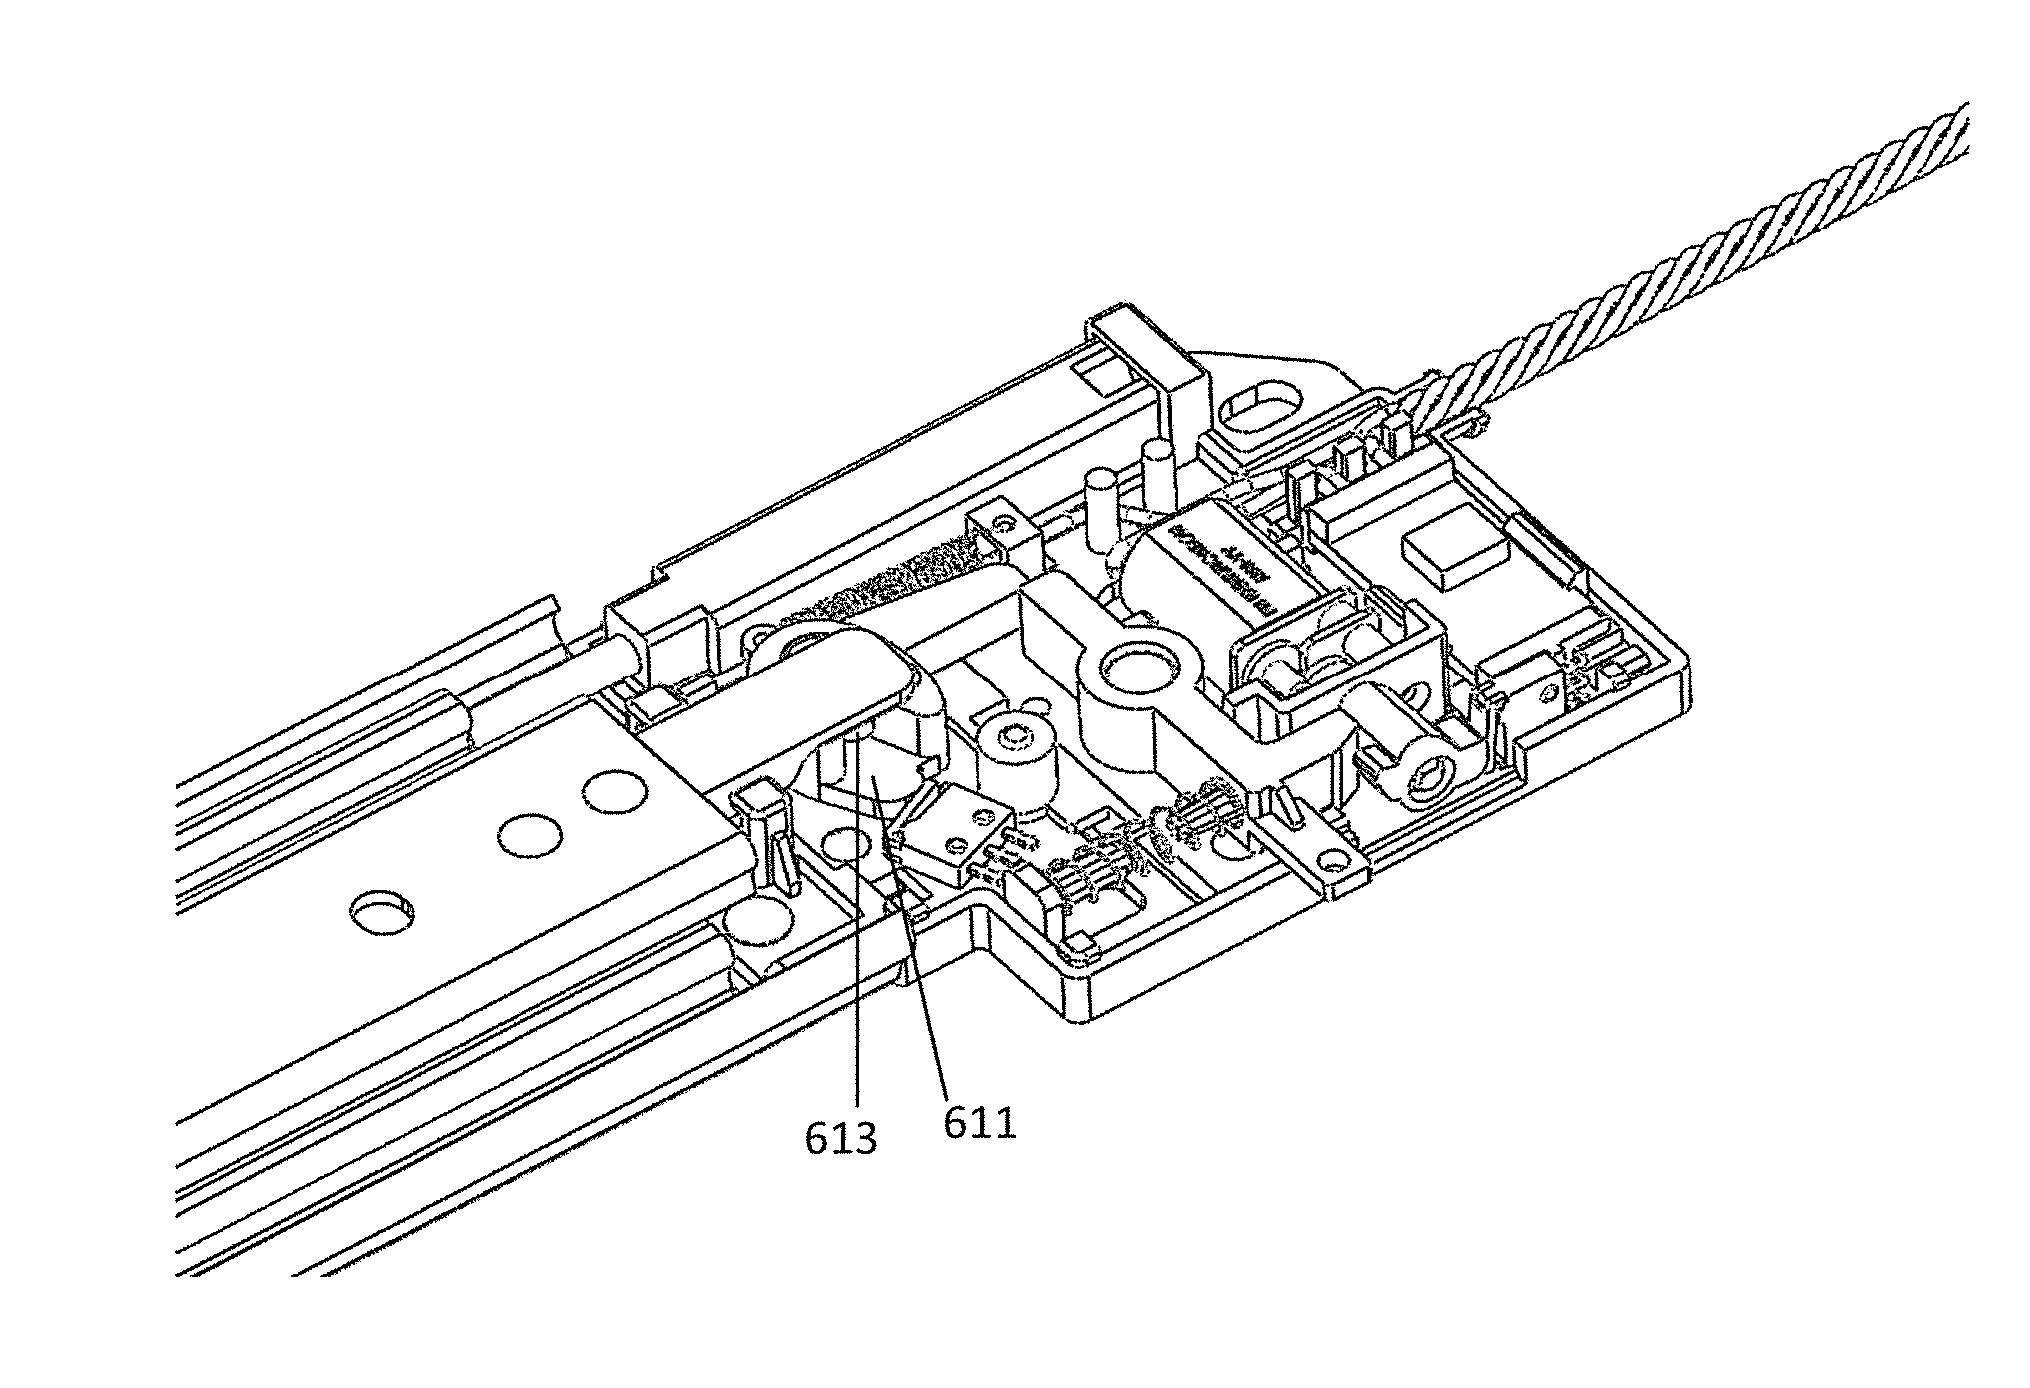 Drawer slide and electronically actuated locking mechanism